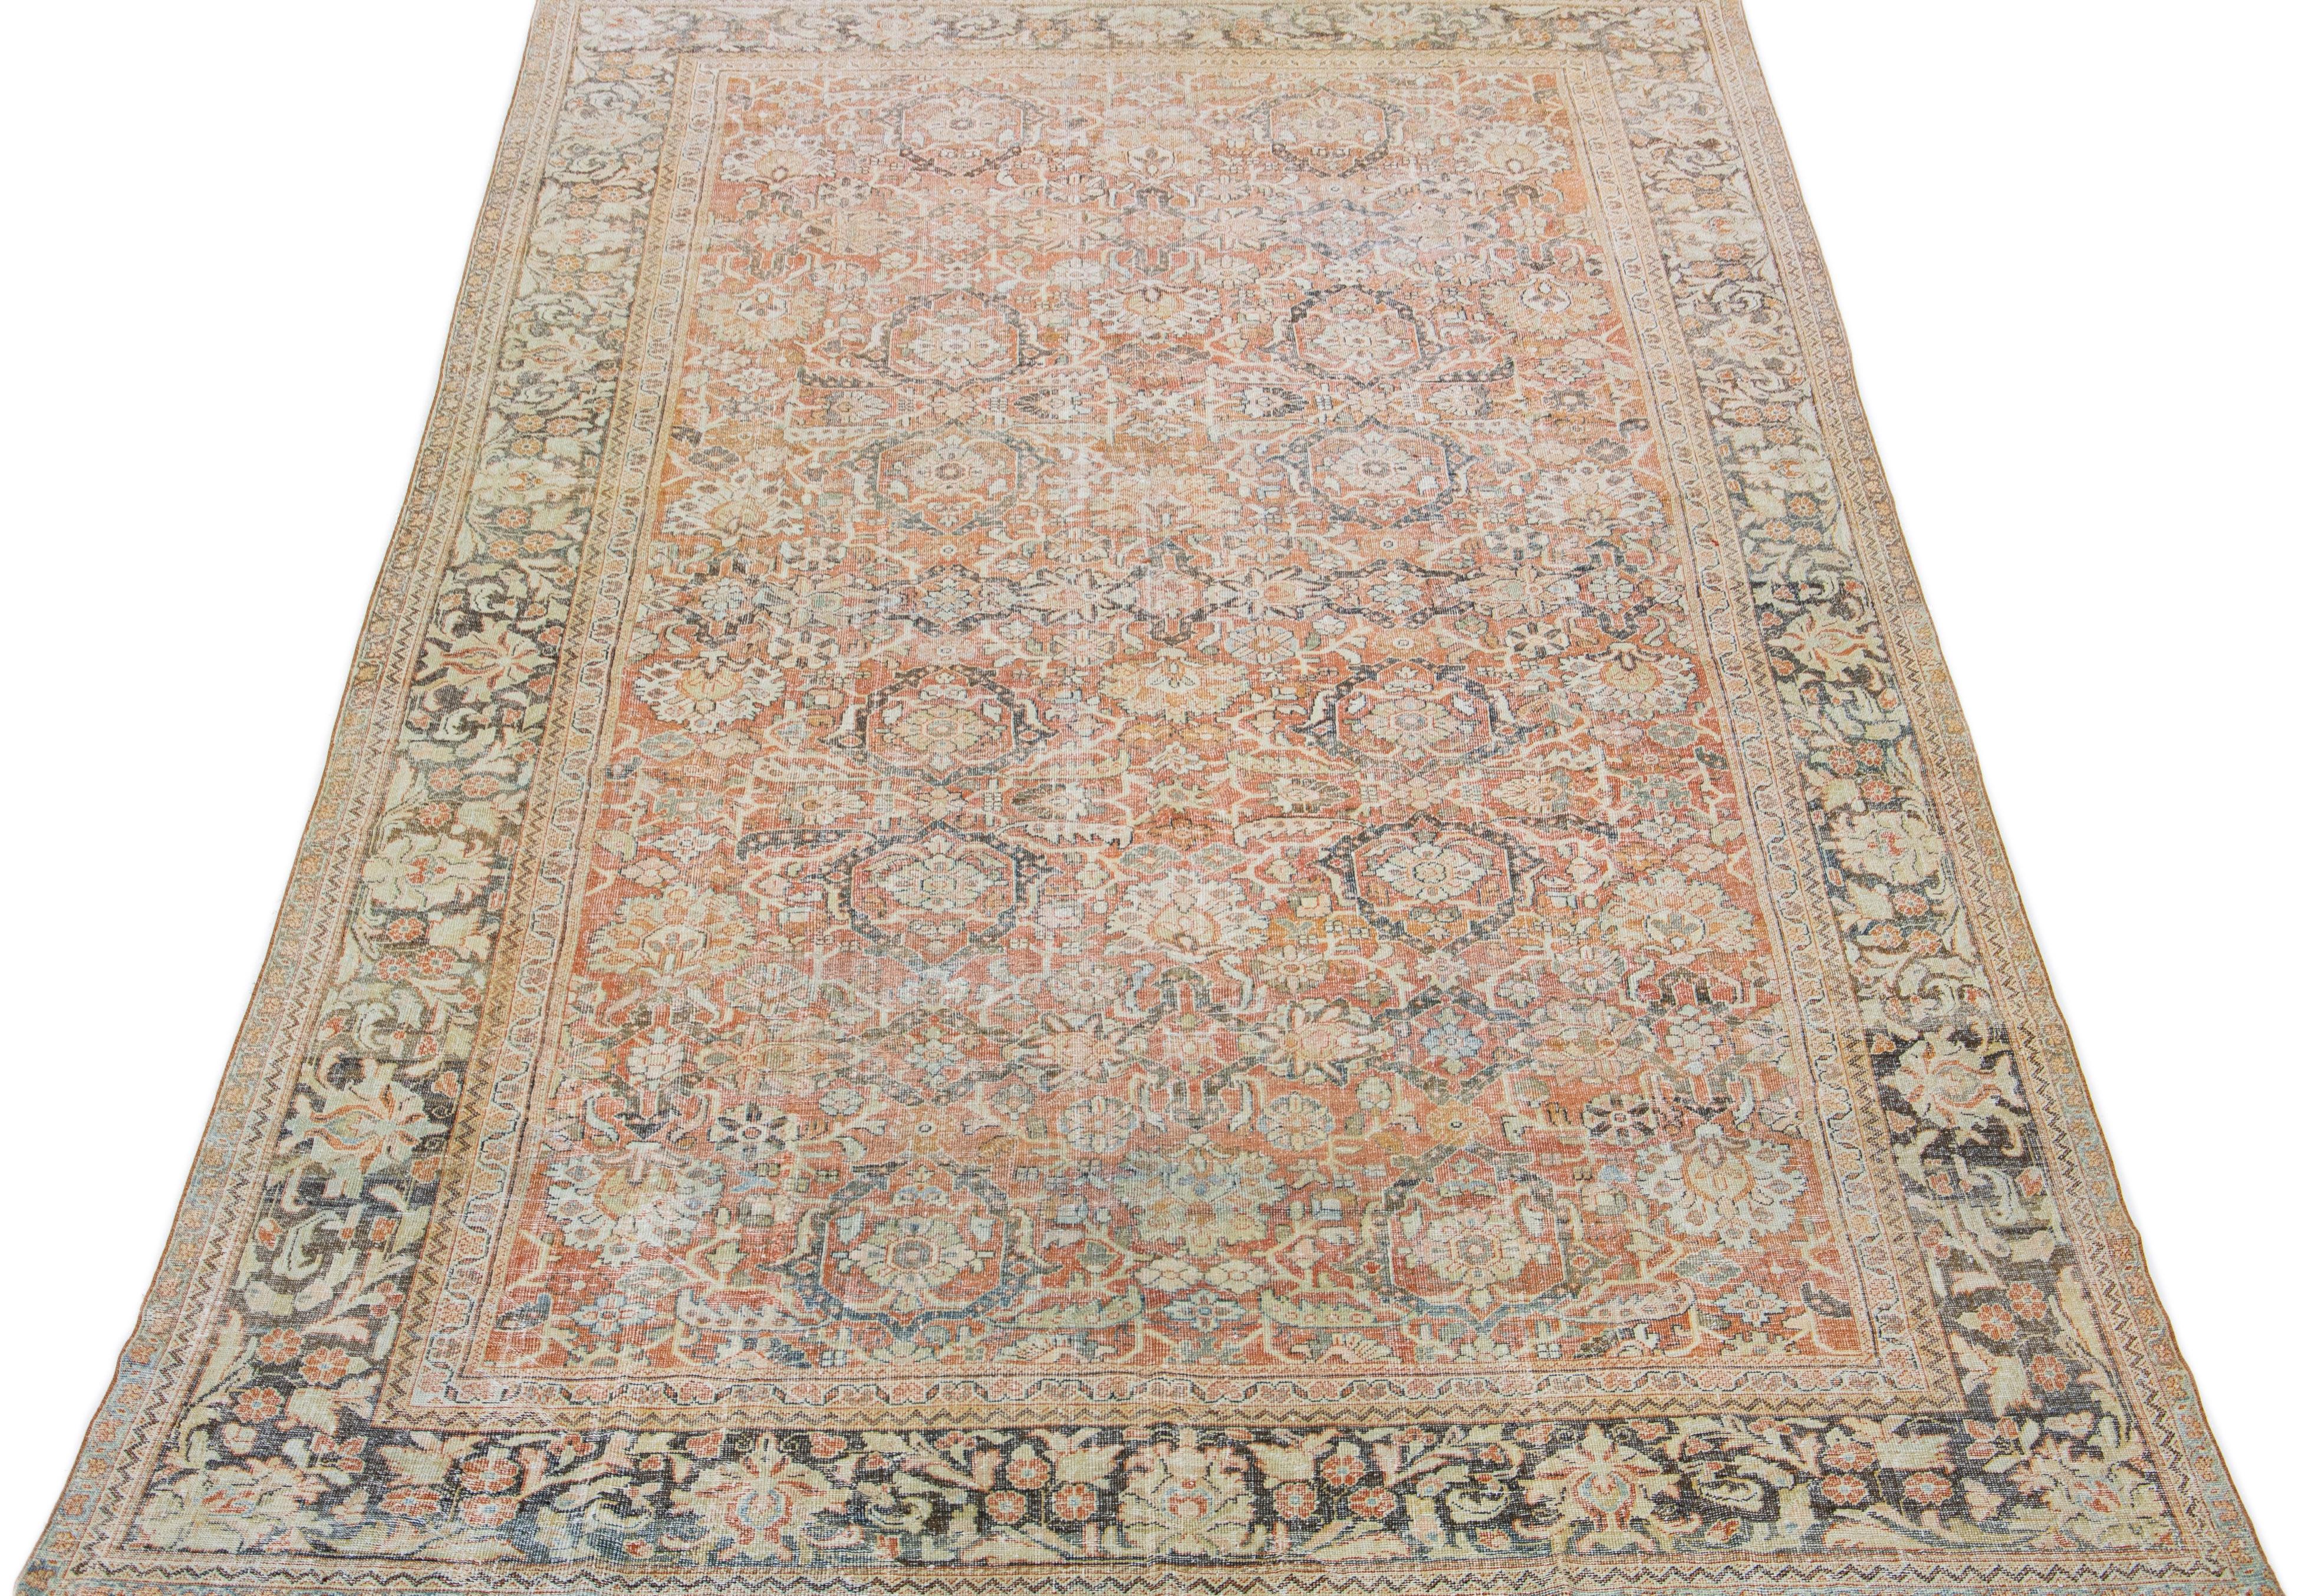 This hand-knotted mahal wool rug from the 1920s showcases a main rust field, complemented by blue, yellow, and brown hues in a traditional Allover floral motif.

This rug measures: 10' x 17'1